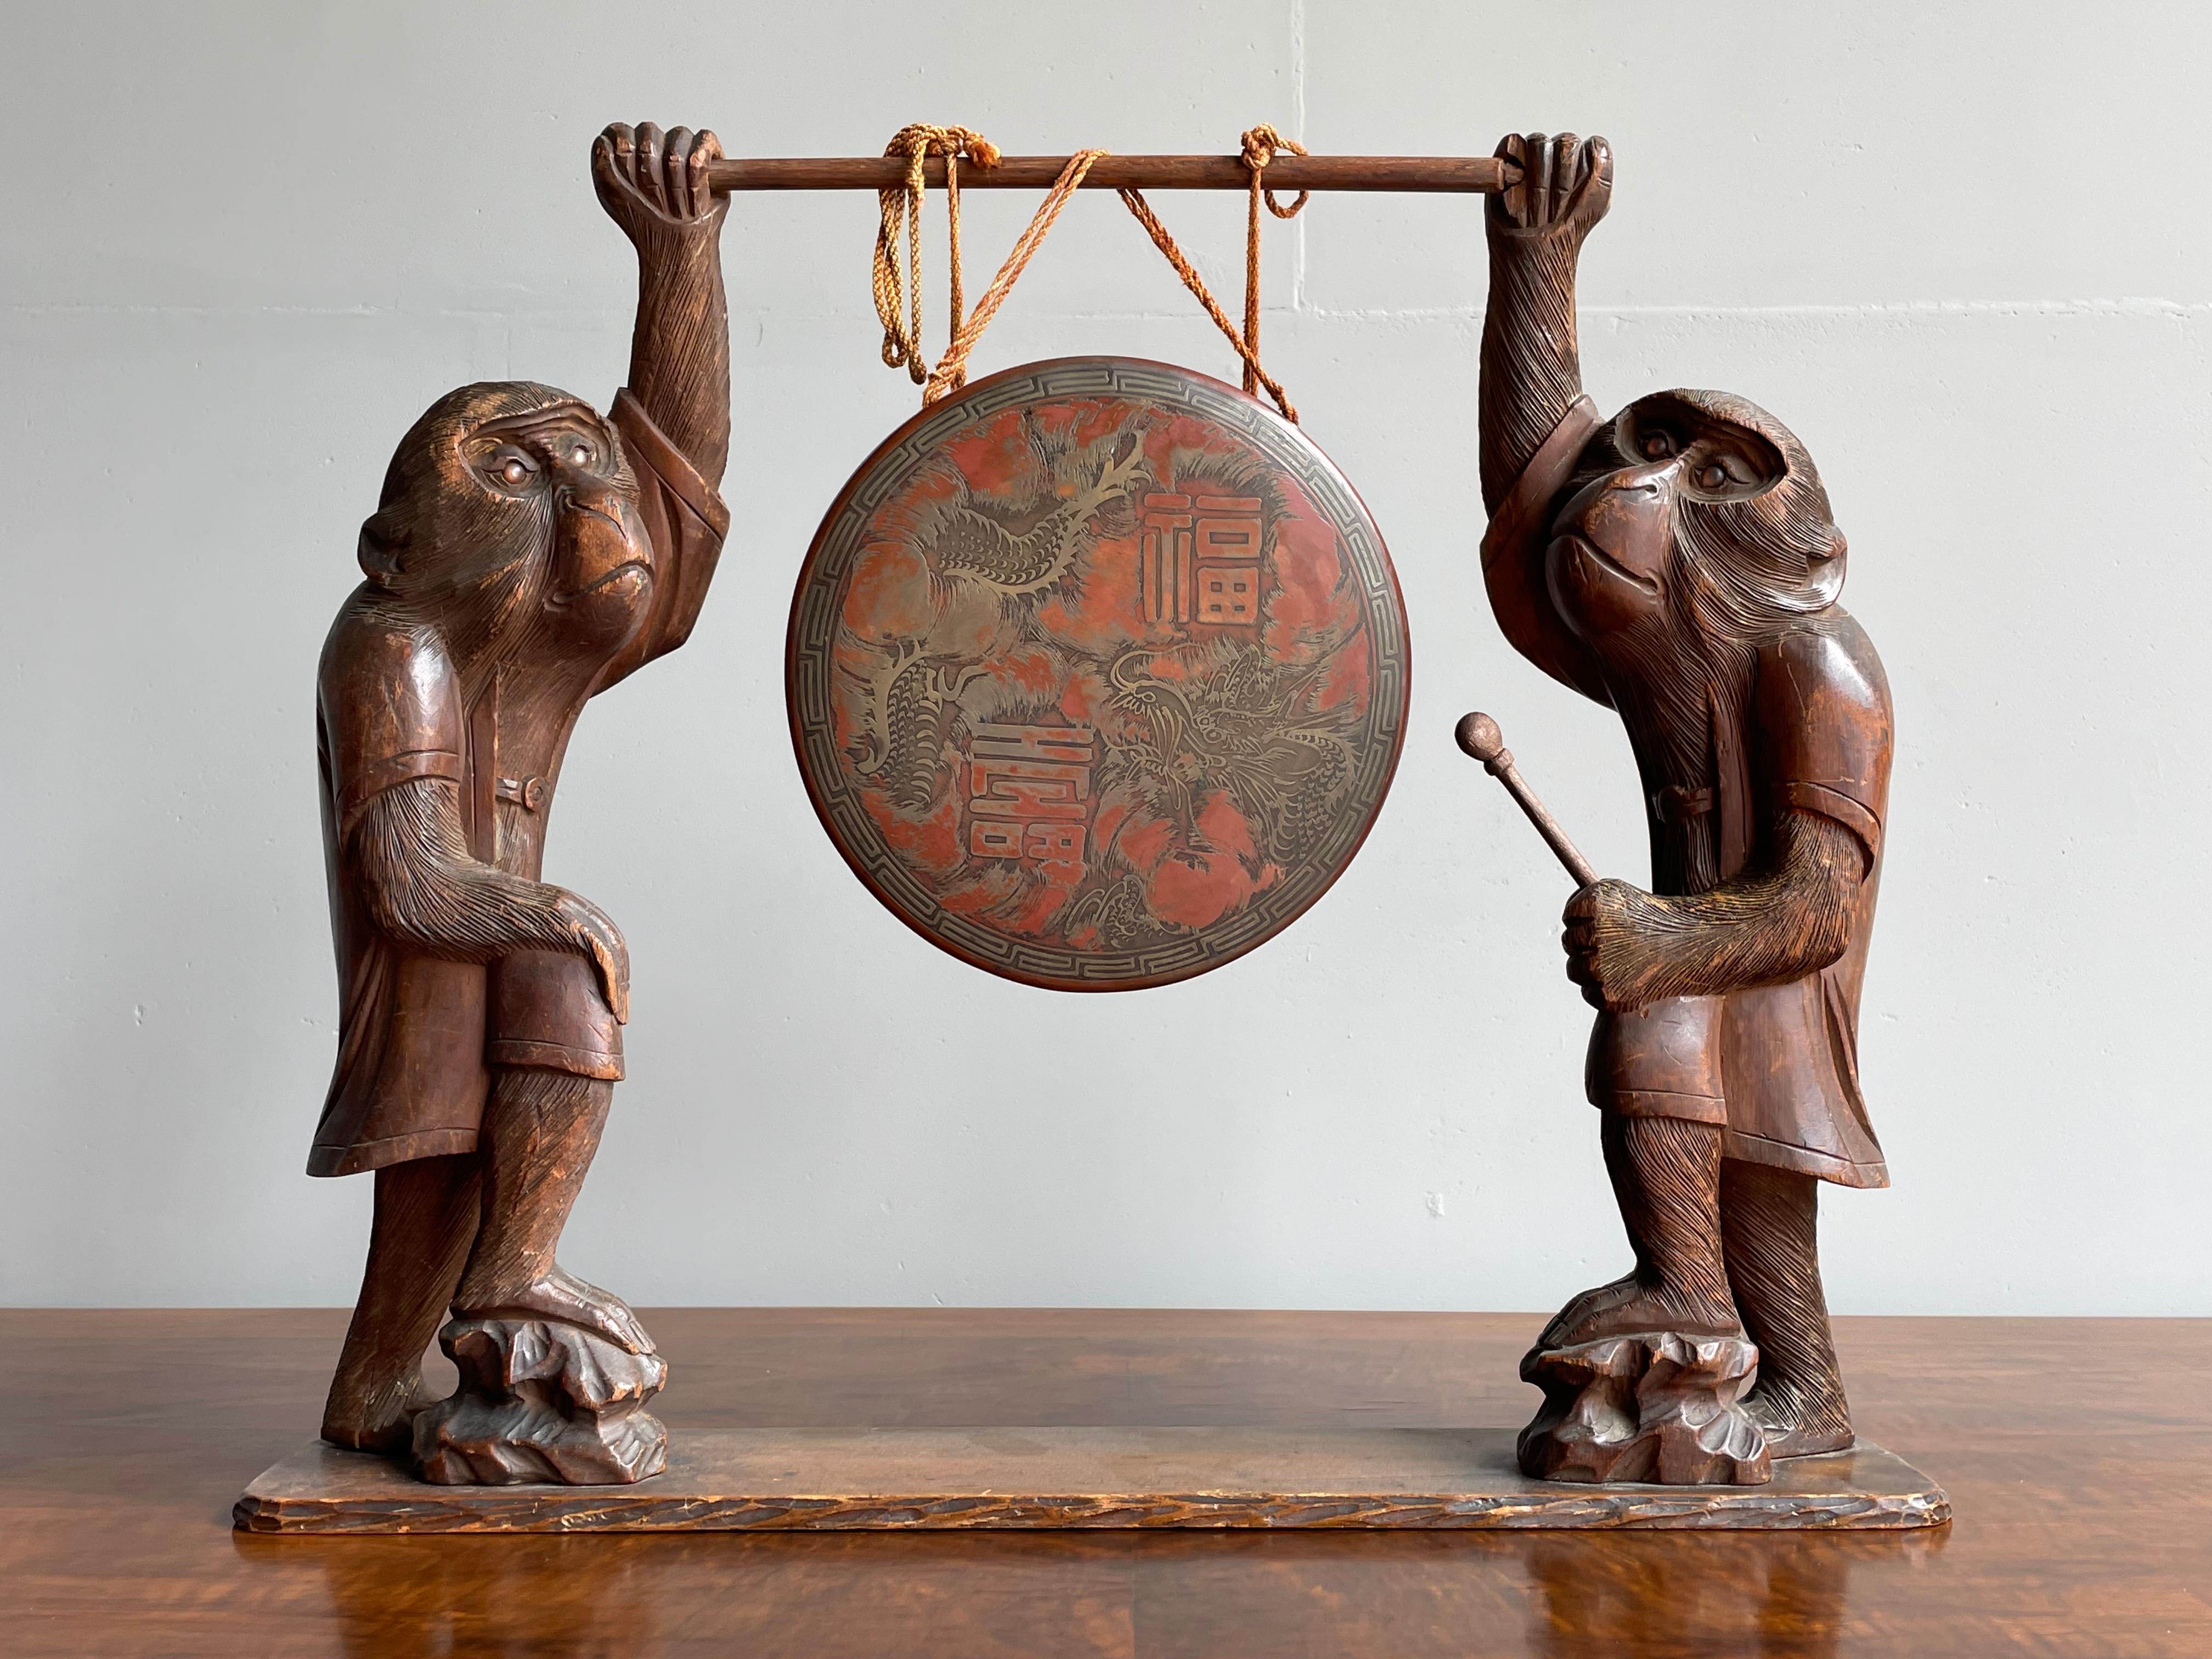 Antique Chinese Table Gong Held Up by Two Hand Carved Wooden Monkey Sculptures 4